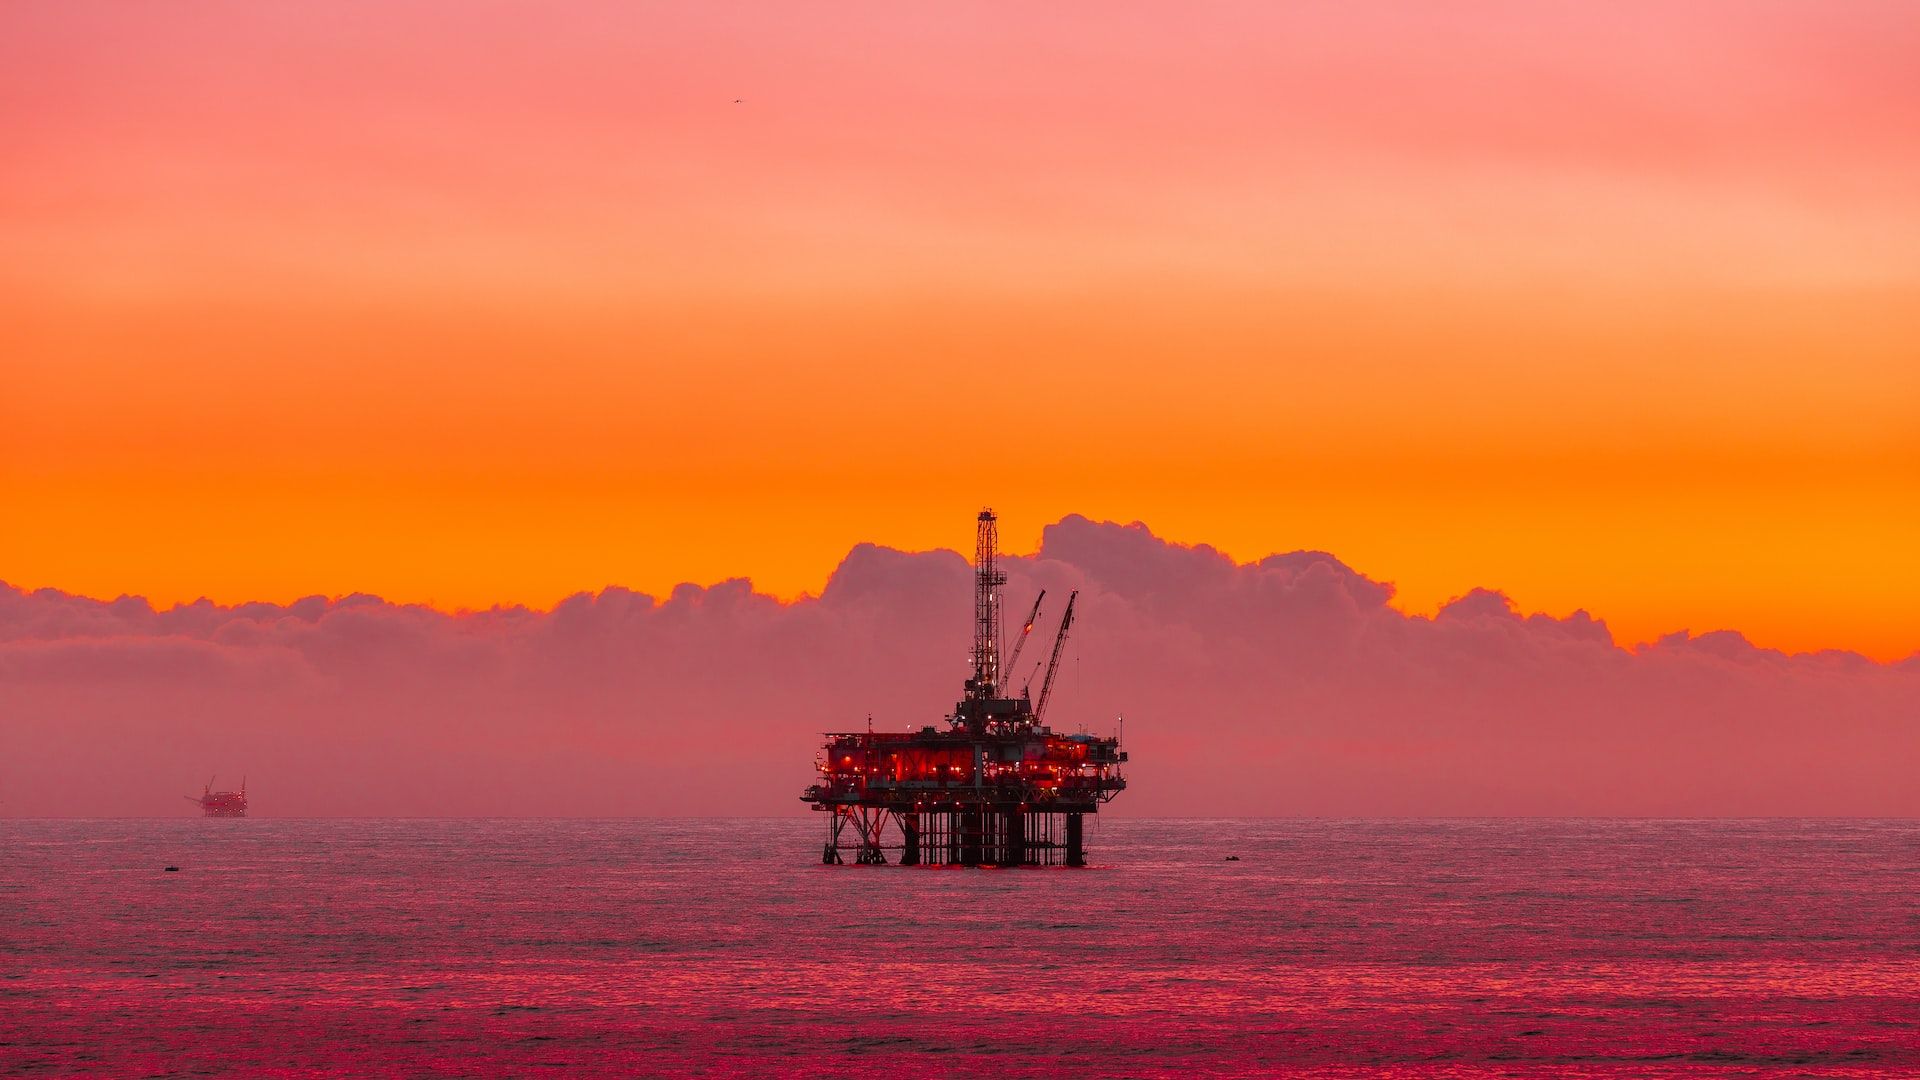 An oil ring under a pink and orange sky